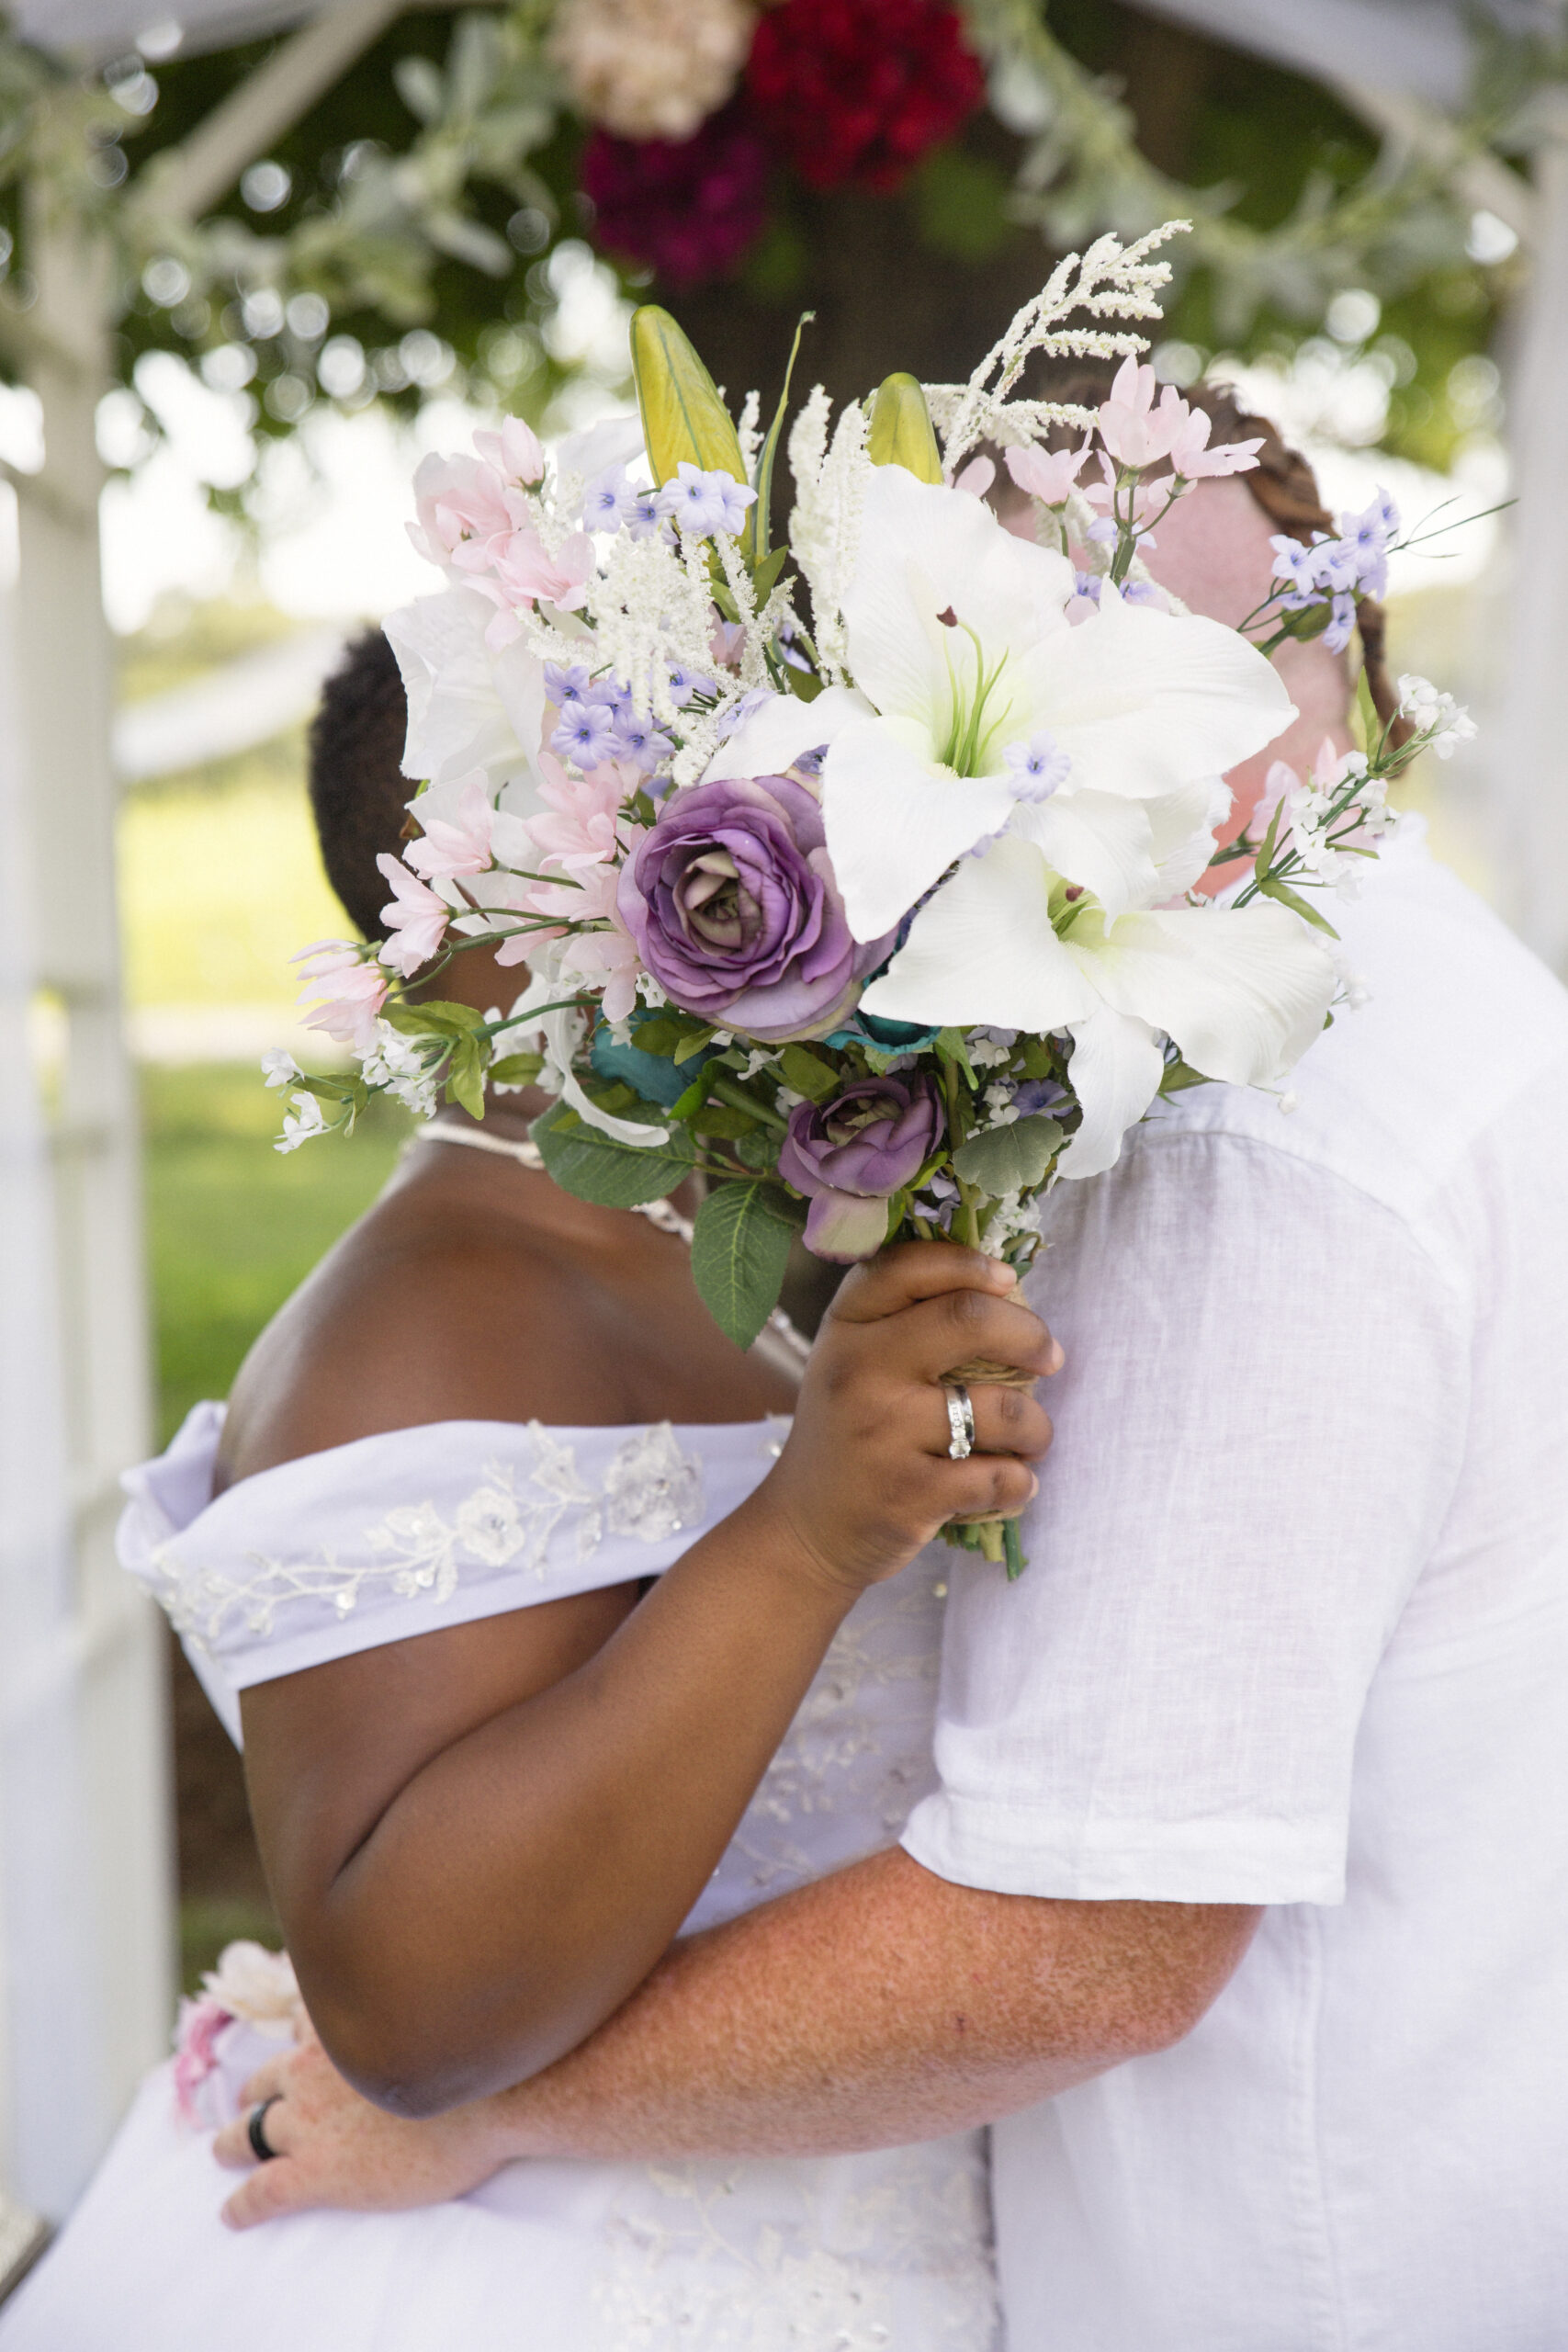 lgbtq couple kissing behind the bouquet